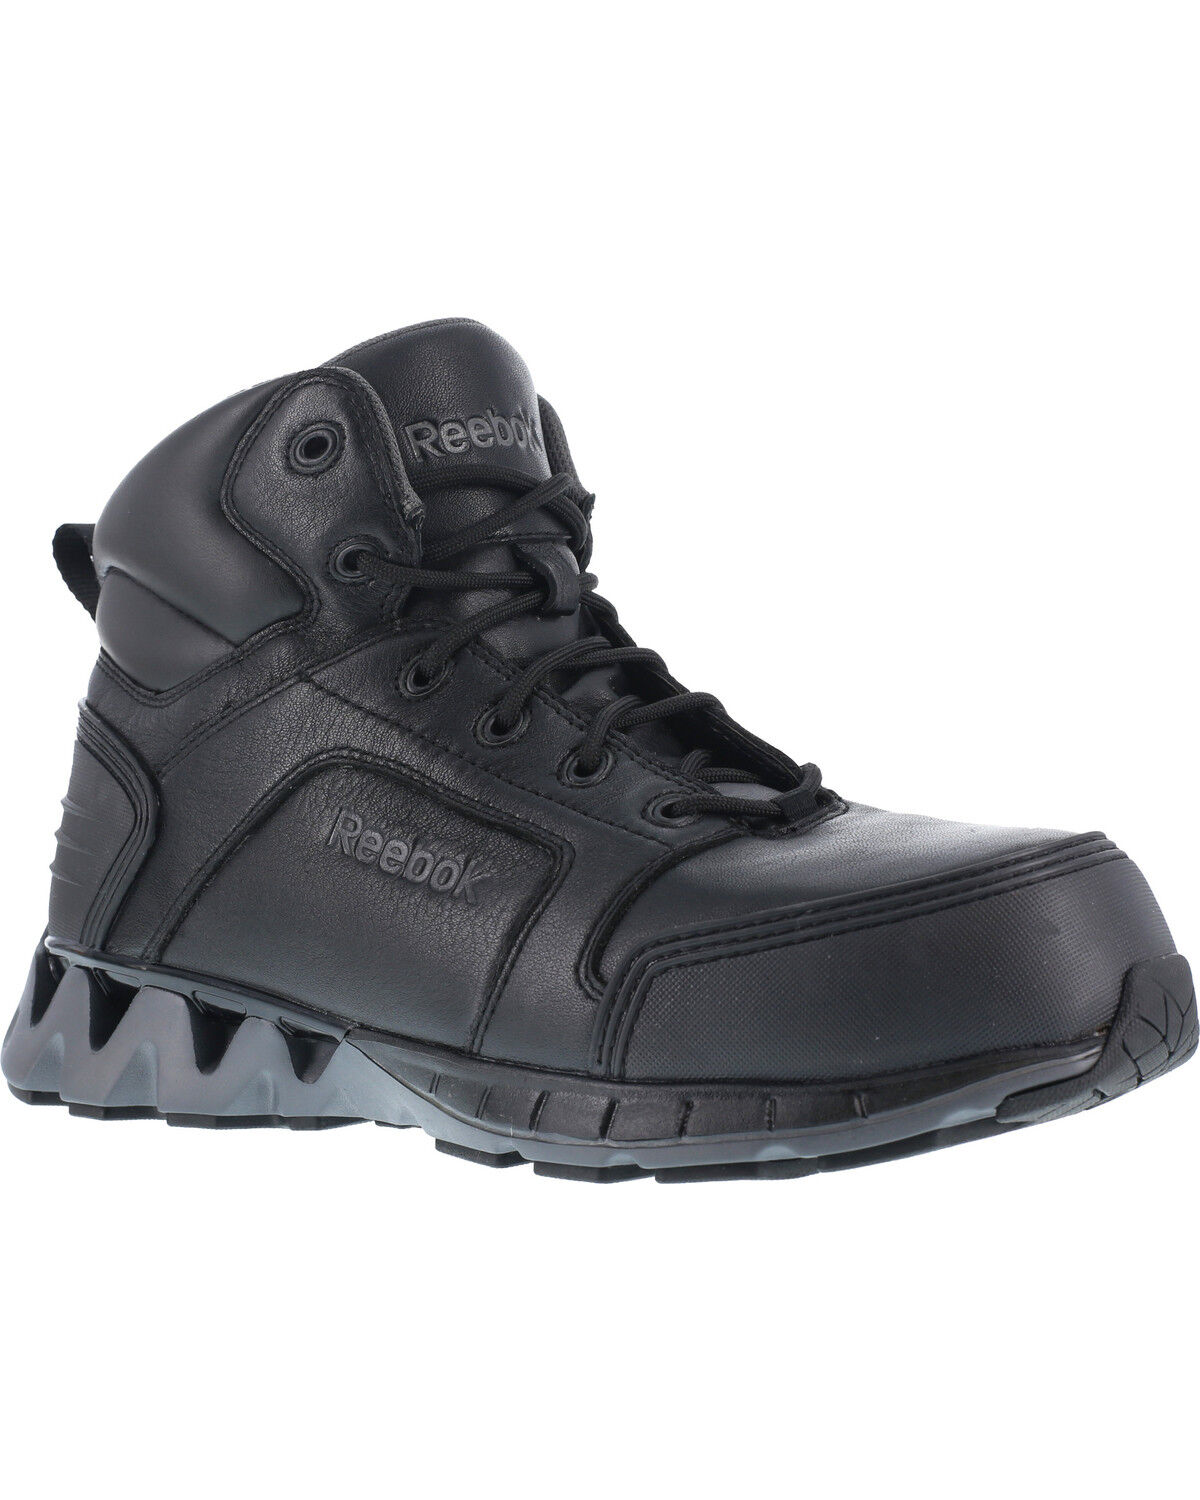 reebok work boots for sale